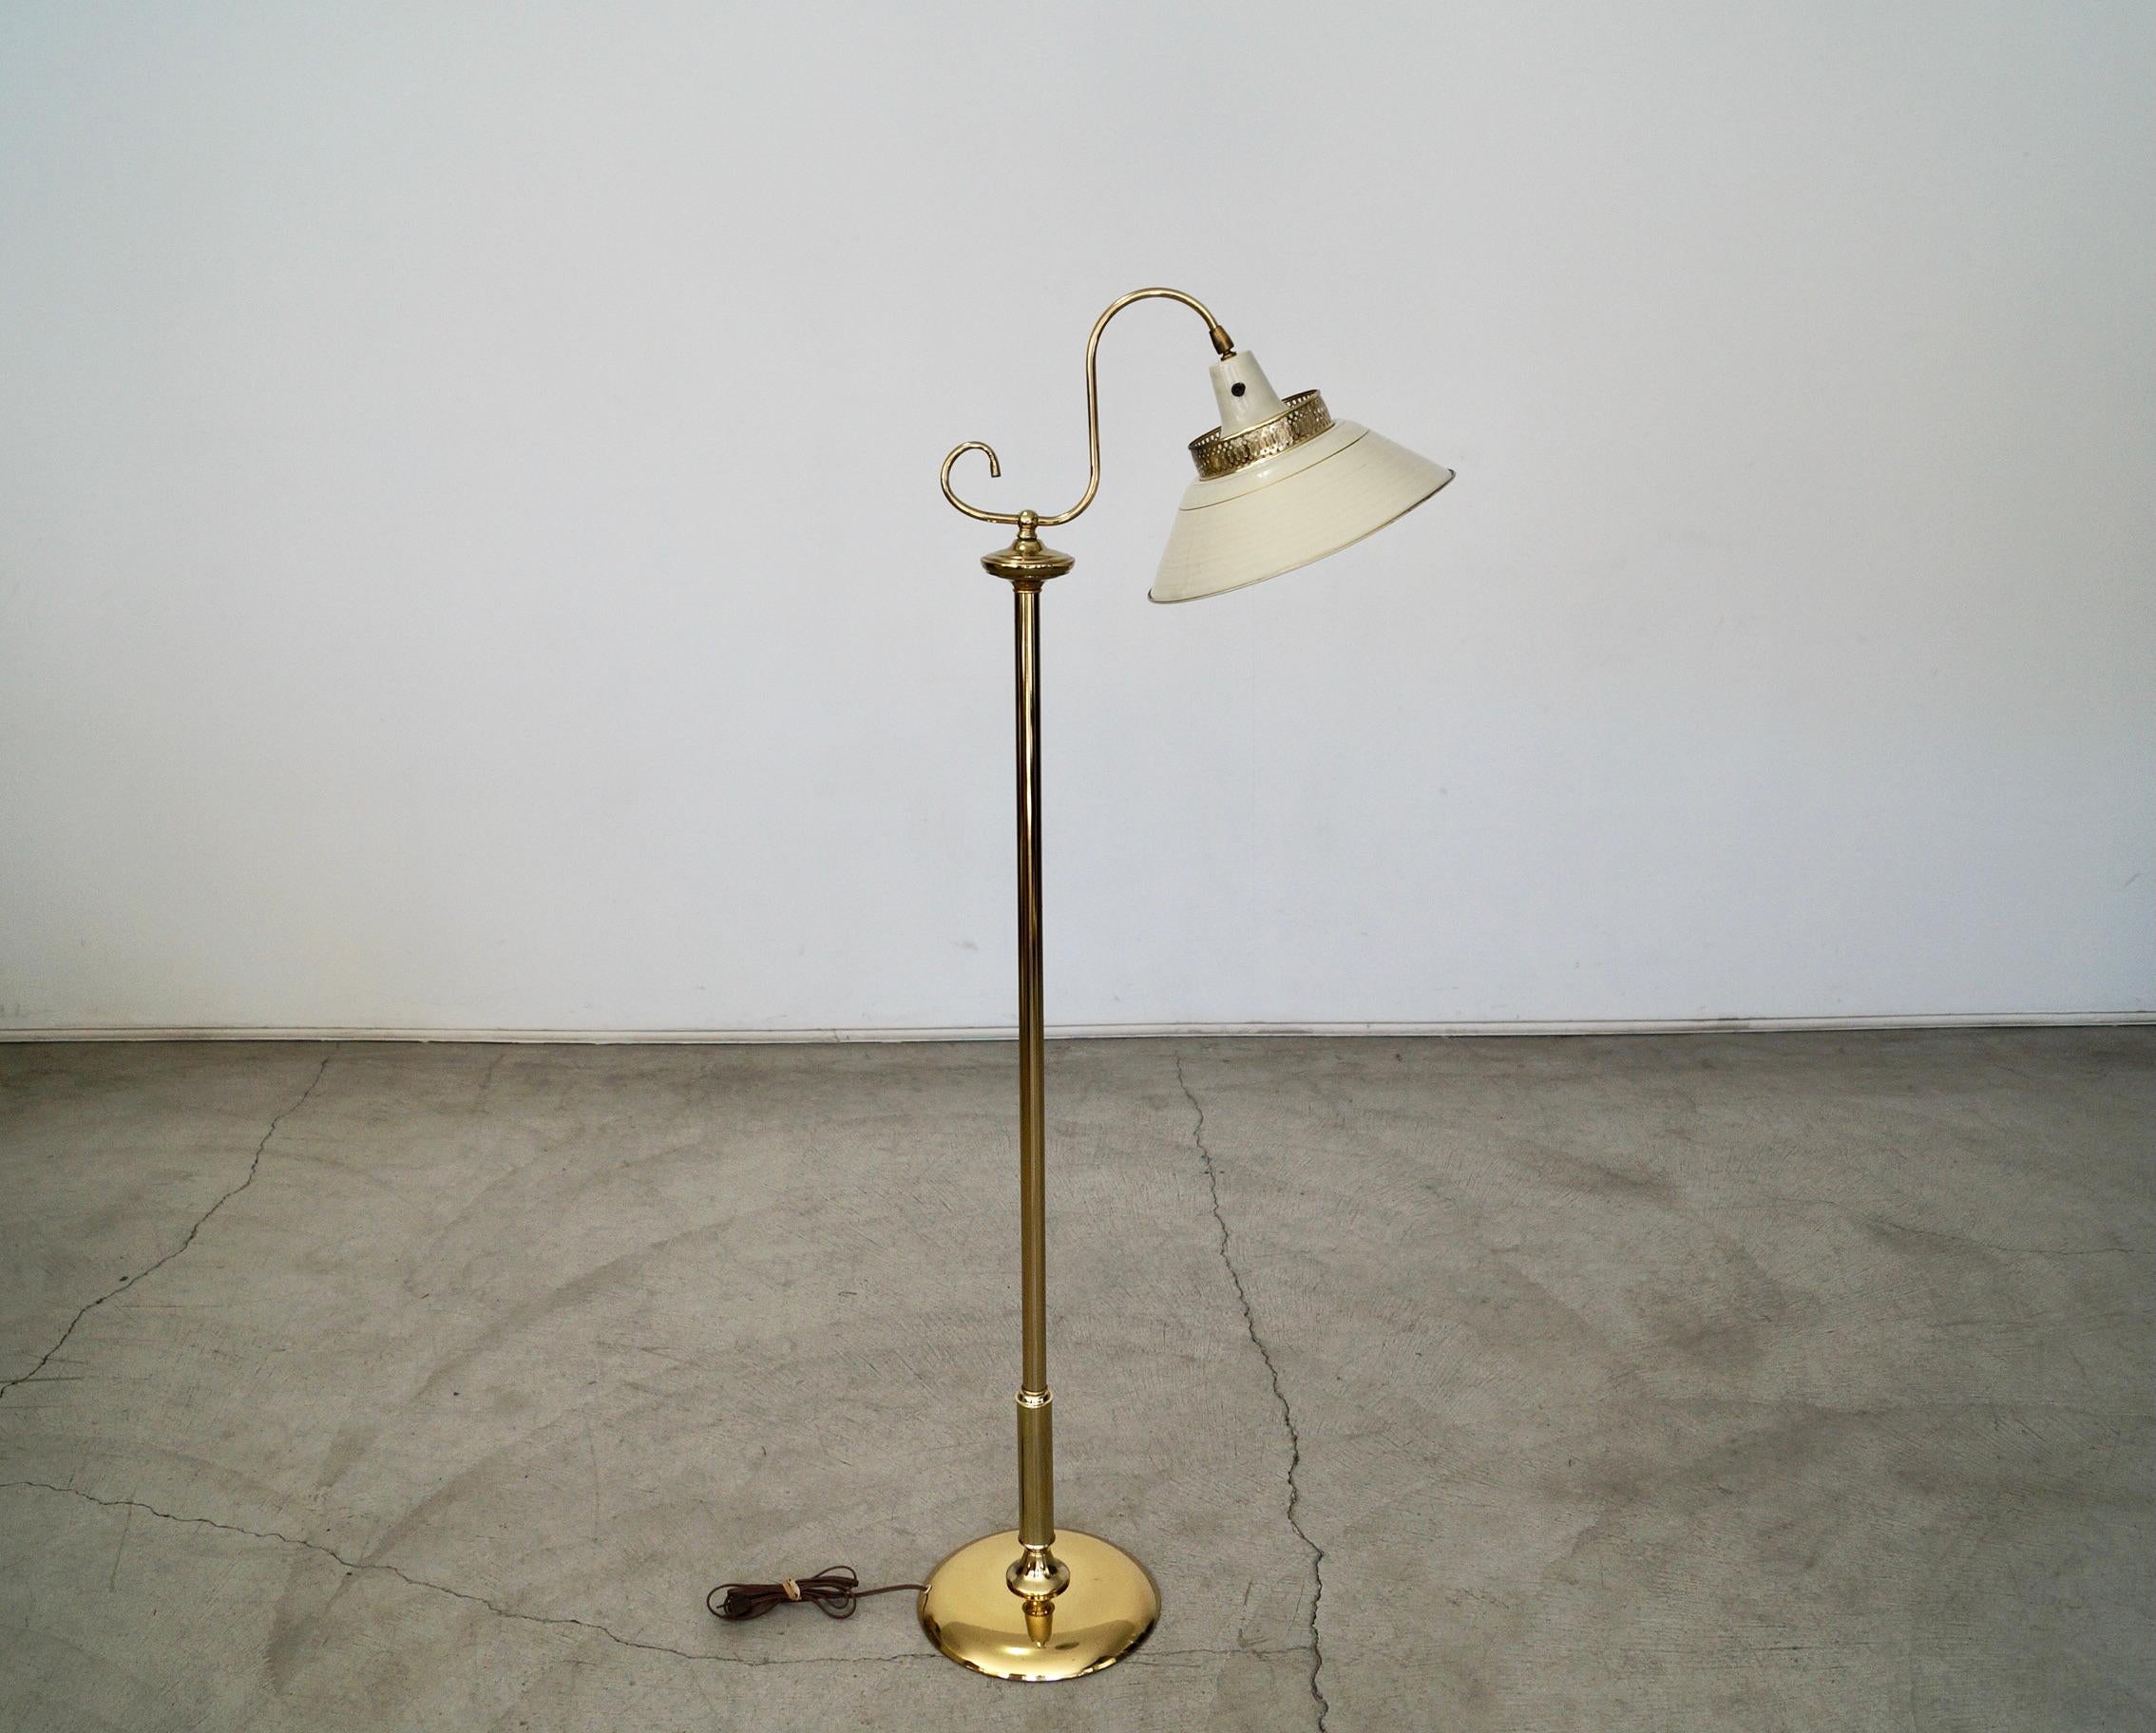 Vintage Mid-century Modern floor lamp for sale. Hollywood Regency design from the early 1960’s. It’s made of brass with a metal enameled shade with a brass trim and brass details. This lamp is in incredible condition, and has been kept beautifully